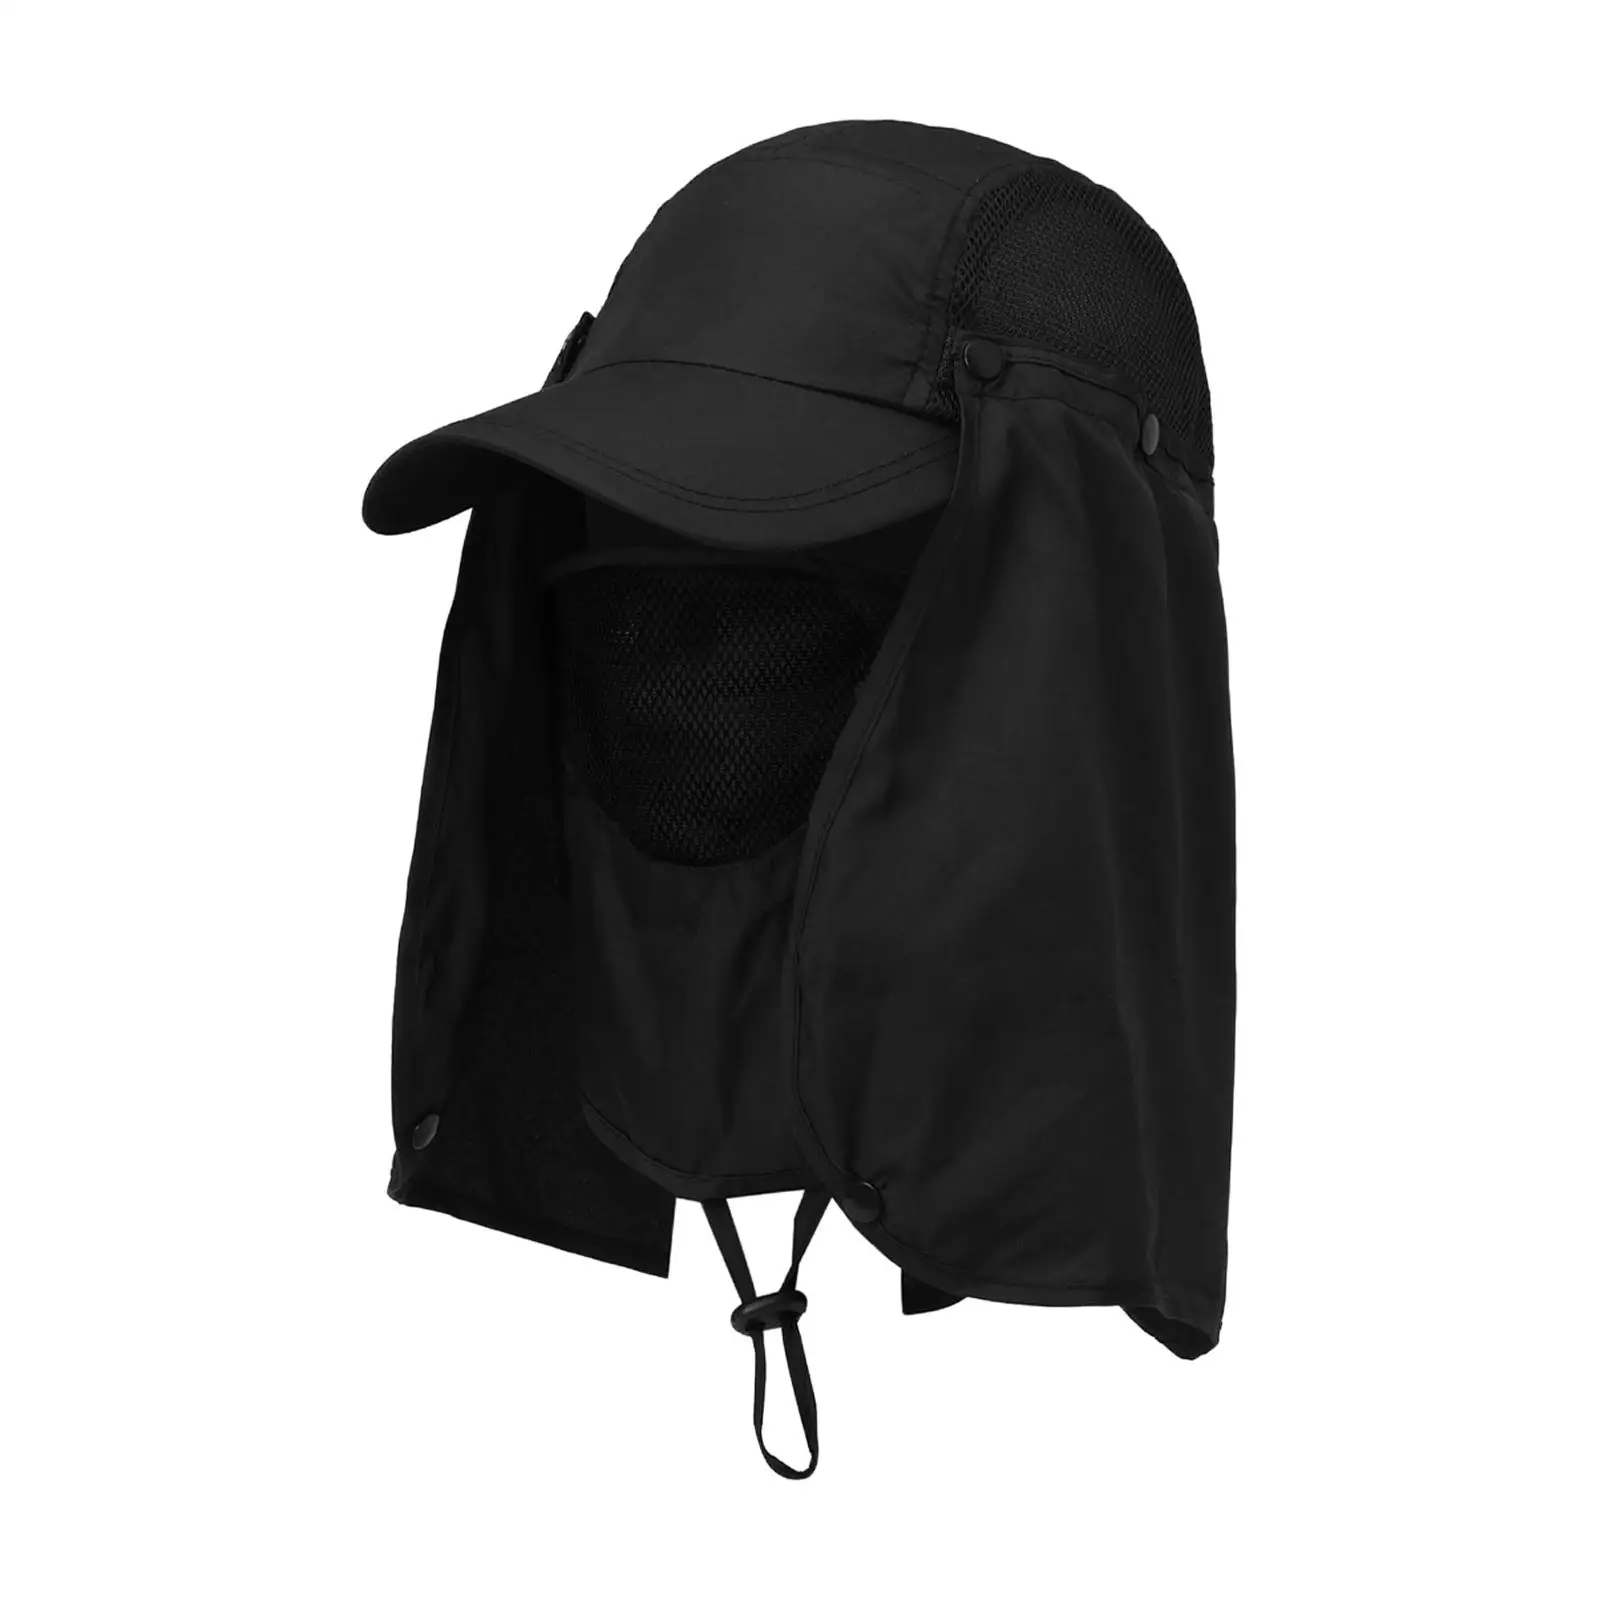 Outdoor Hiking Hat with Removable Face Neck Flap Cover Baseball Cap Dustproof Sun Cap for Cycling Travel Hiking Men Women Unisex